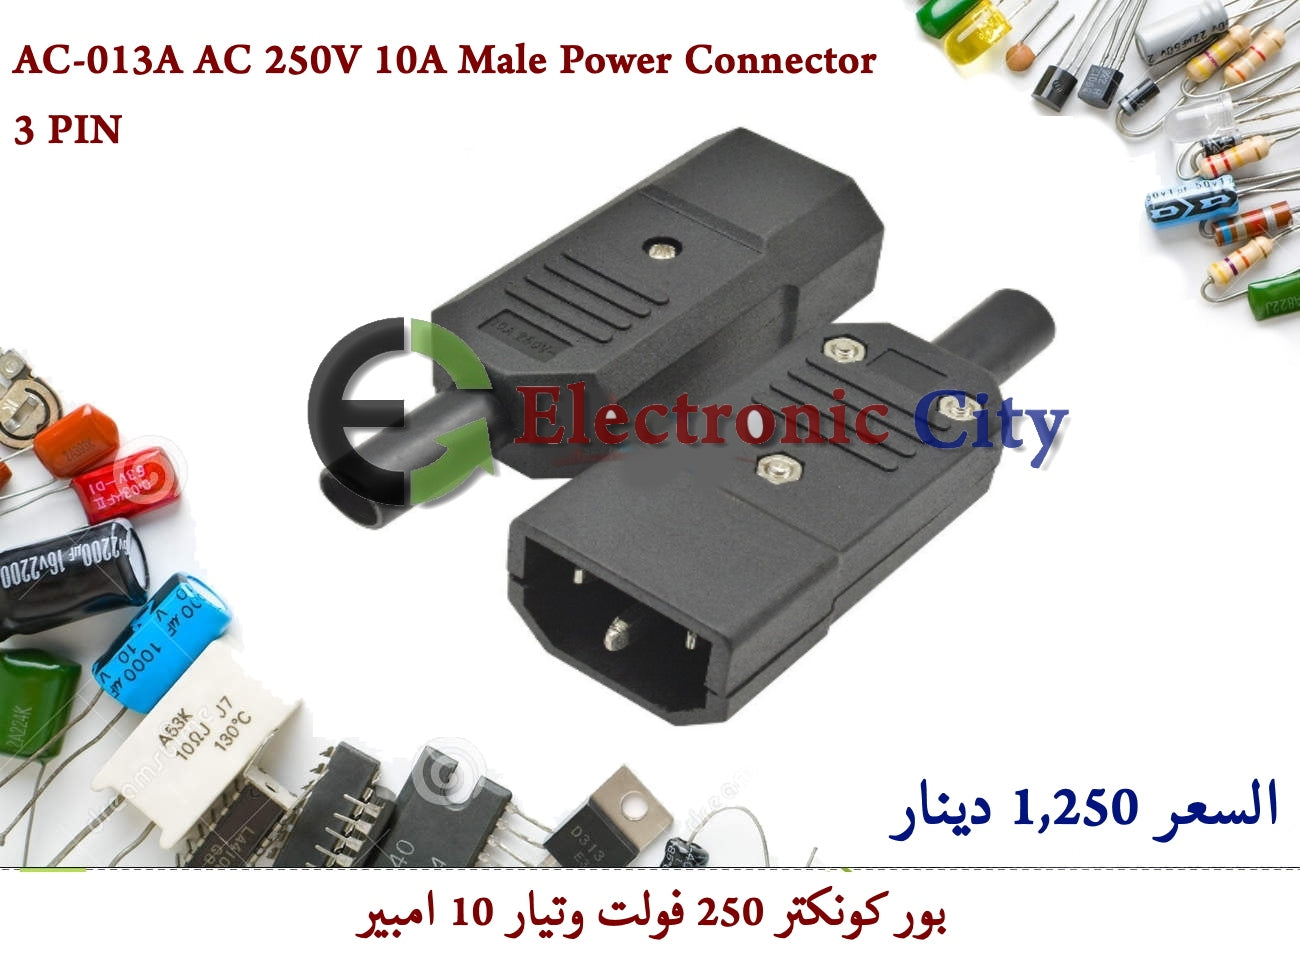 AC-013A AC 250V 10A Male Power Connector 3 PIN #L10 X52392